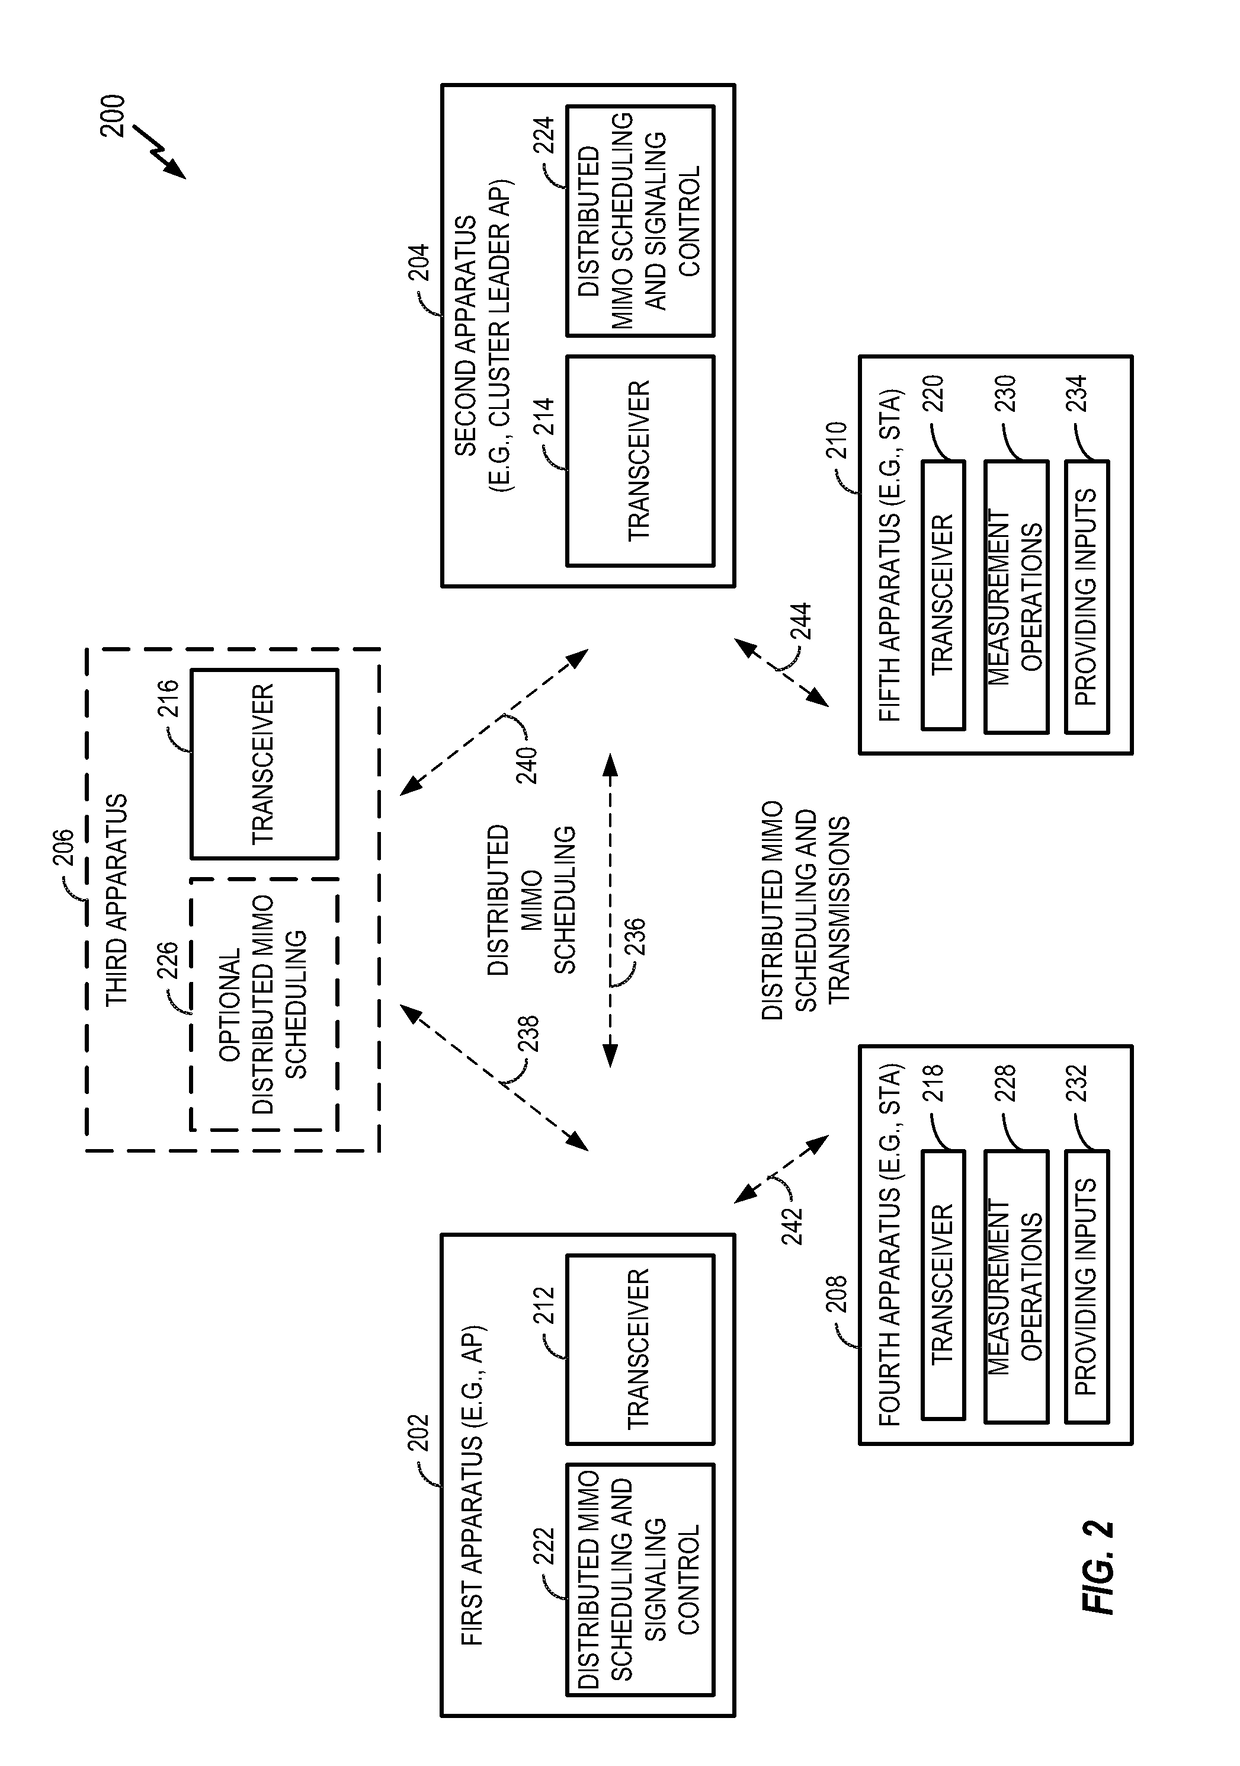 Distributed MIMO communication scheduling in an access point cluster